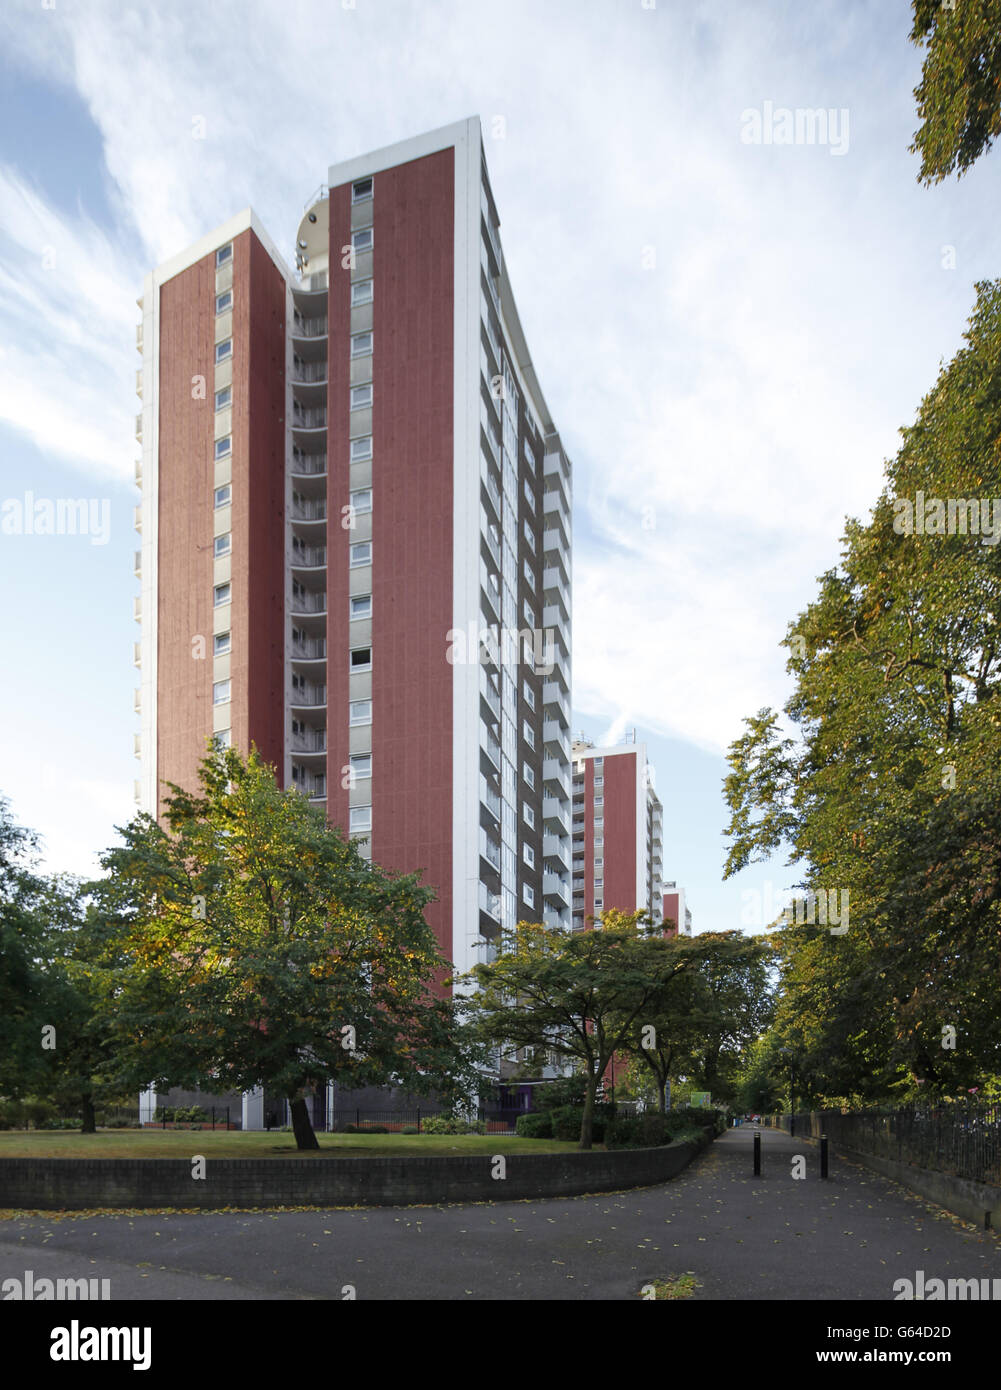 The three tower blocks in Lewisham Park, in SE London. They are owned by L&Q London Housing Association. Stock Photo